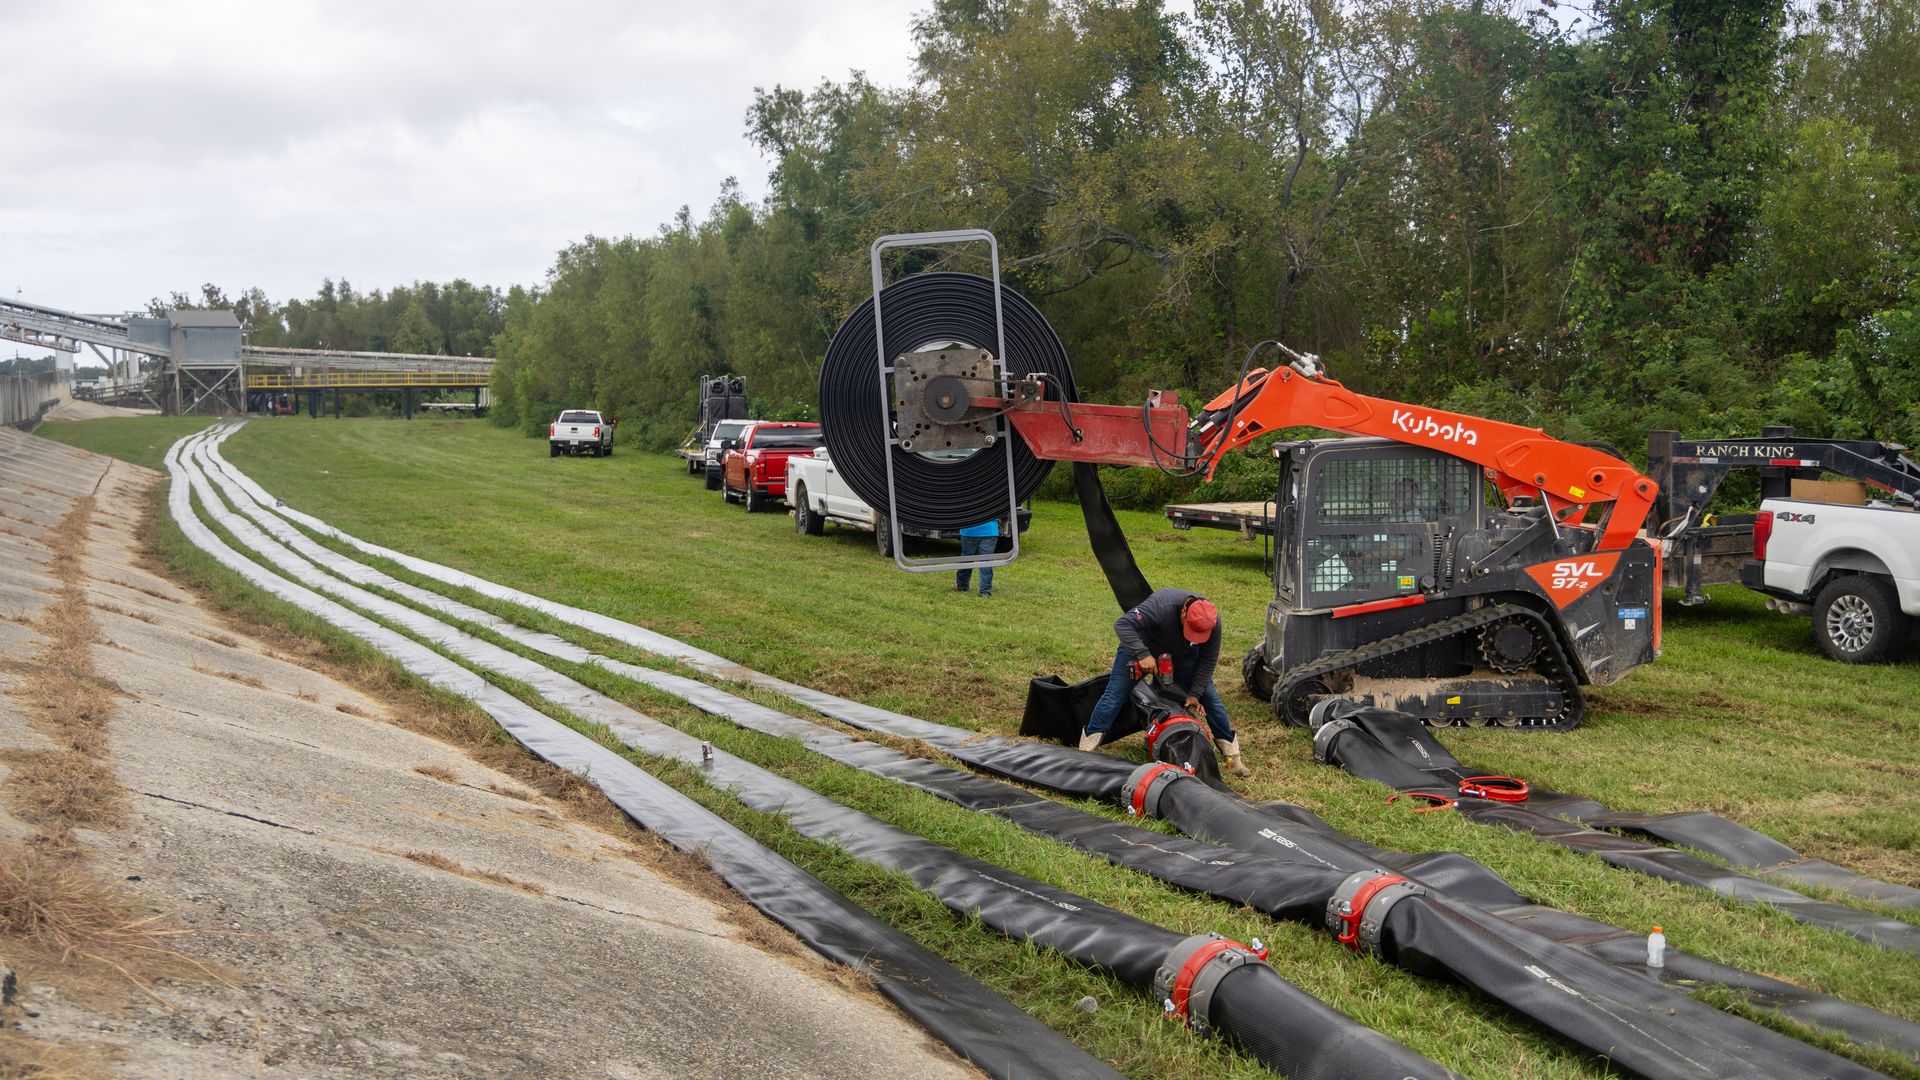 Rows of flexible pipeline are laid on the batture. Construction equipment waits nearby.